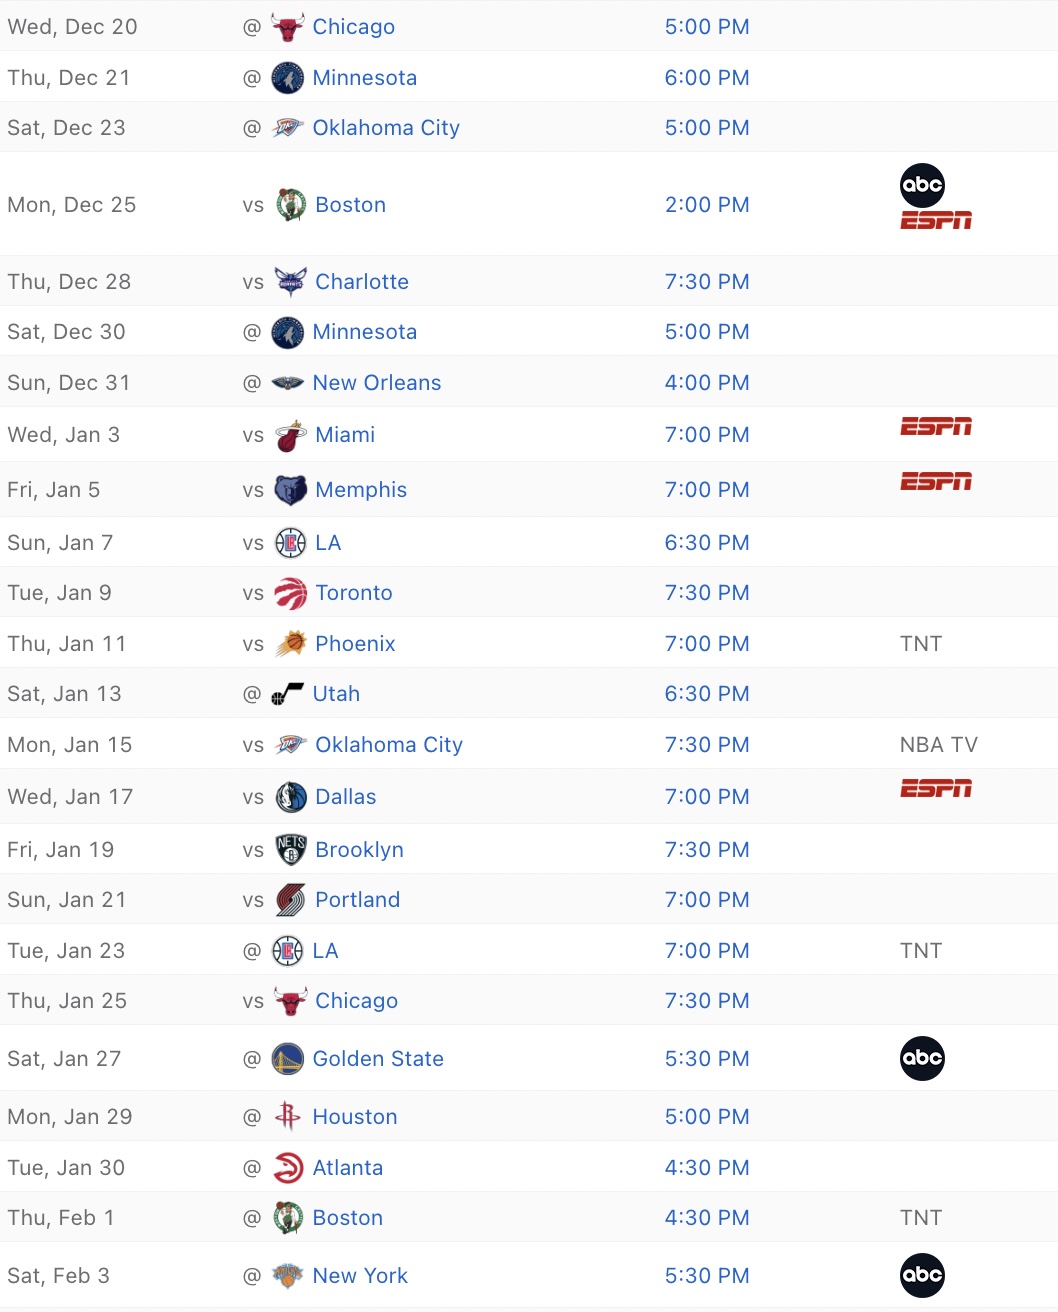 lakers schedule 2021 2022